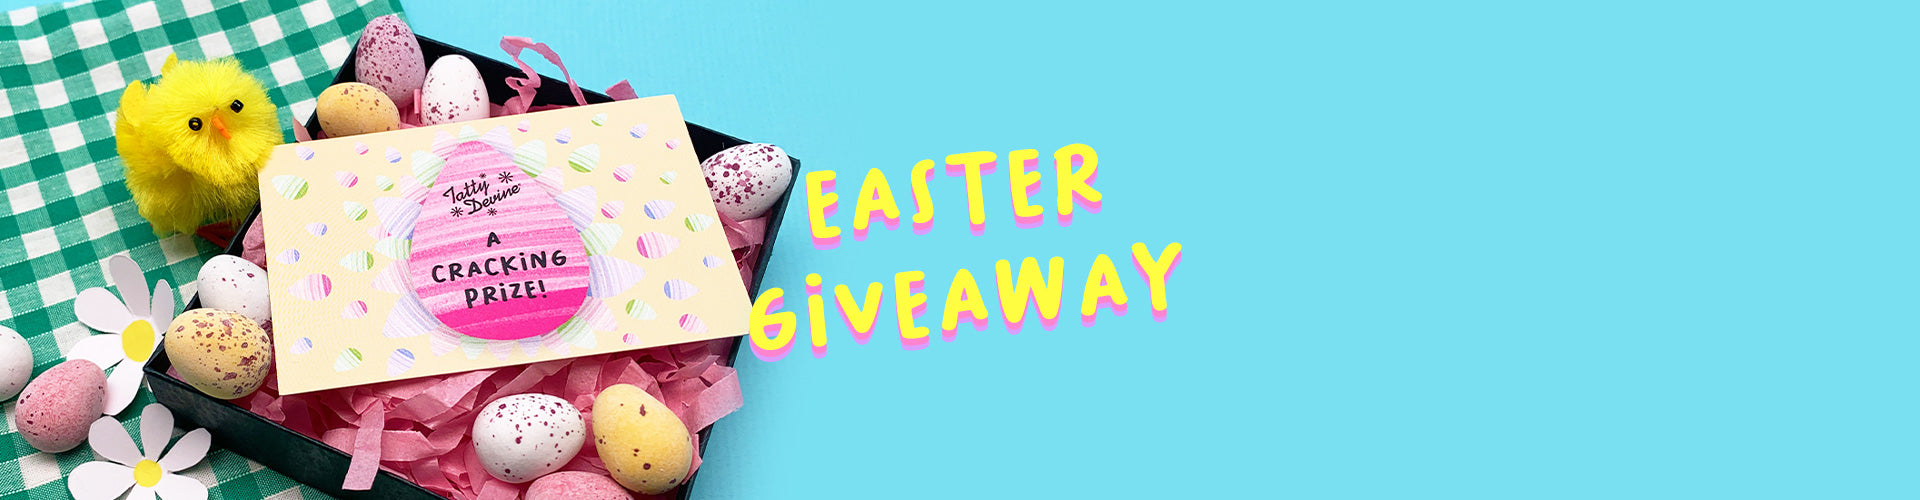 The BIG Easter giveaway!